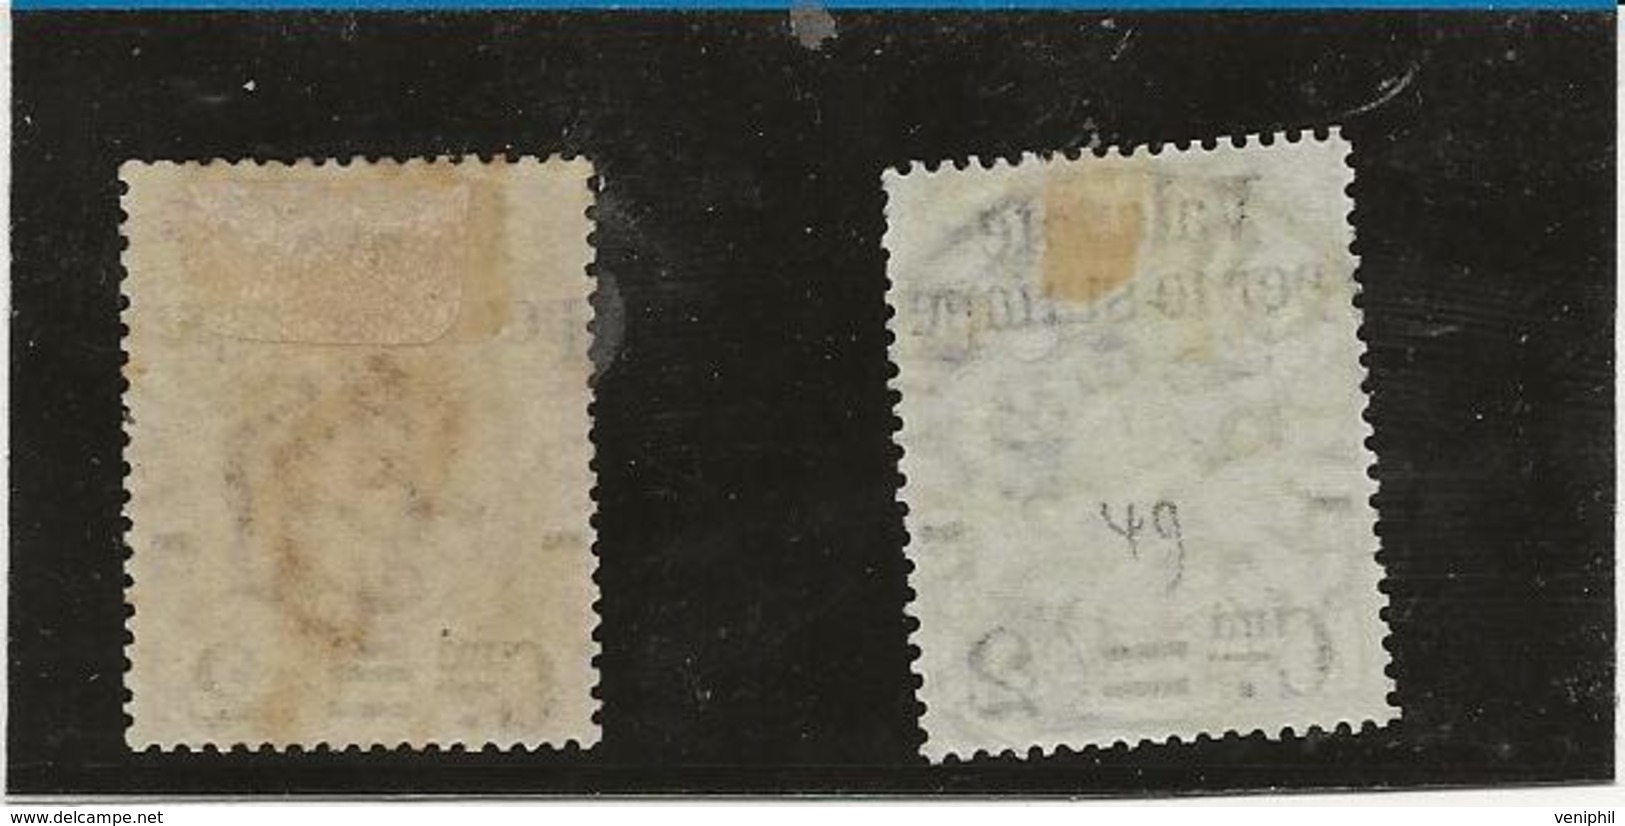 TIMBRES N° 48 NEUF S GOMME + N° 49 OBLITERE - ANNEE 1890 - COTE : 40 € - Oblitérés